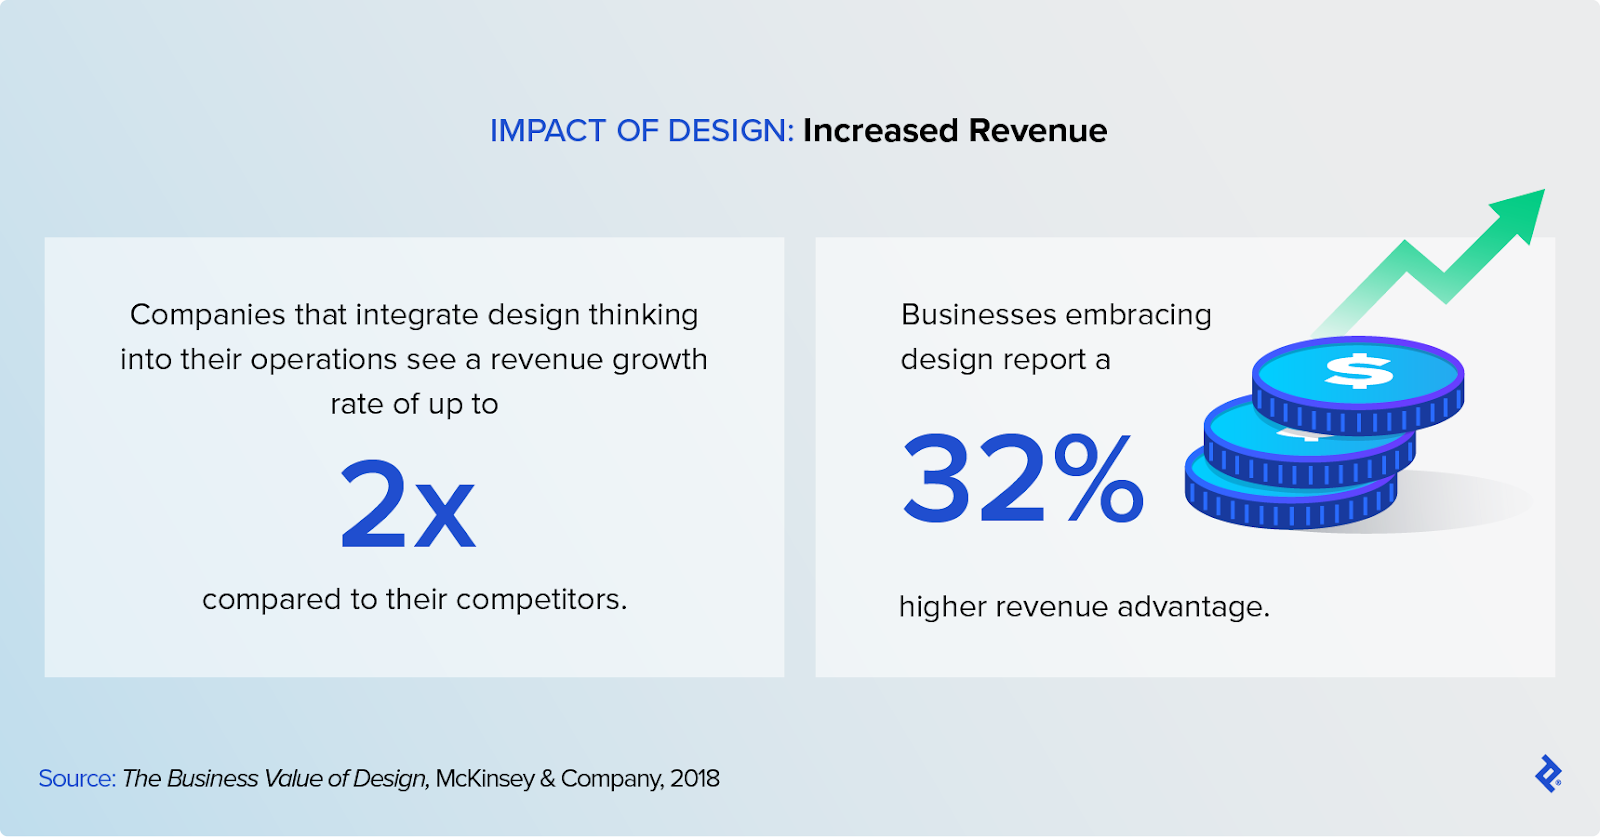 Companies that value design and integrate design thinking into their operations see a higher revenue growth rate than their competitors.